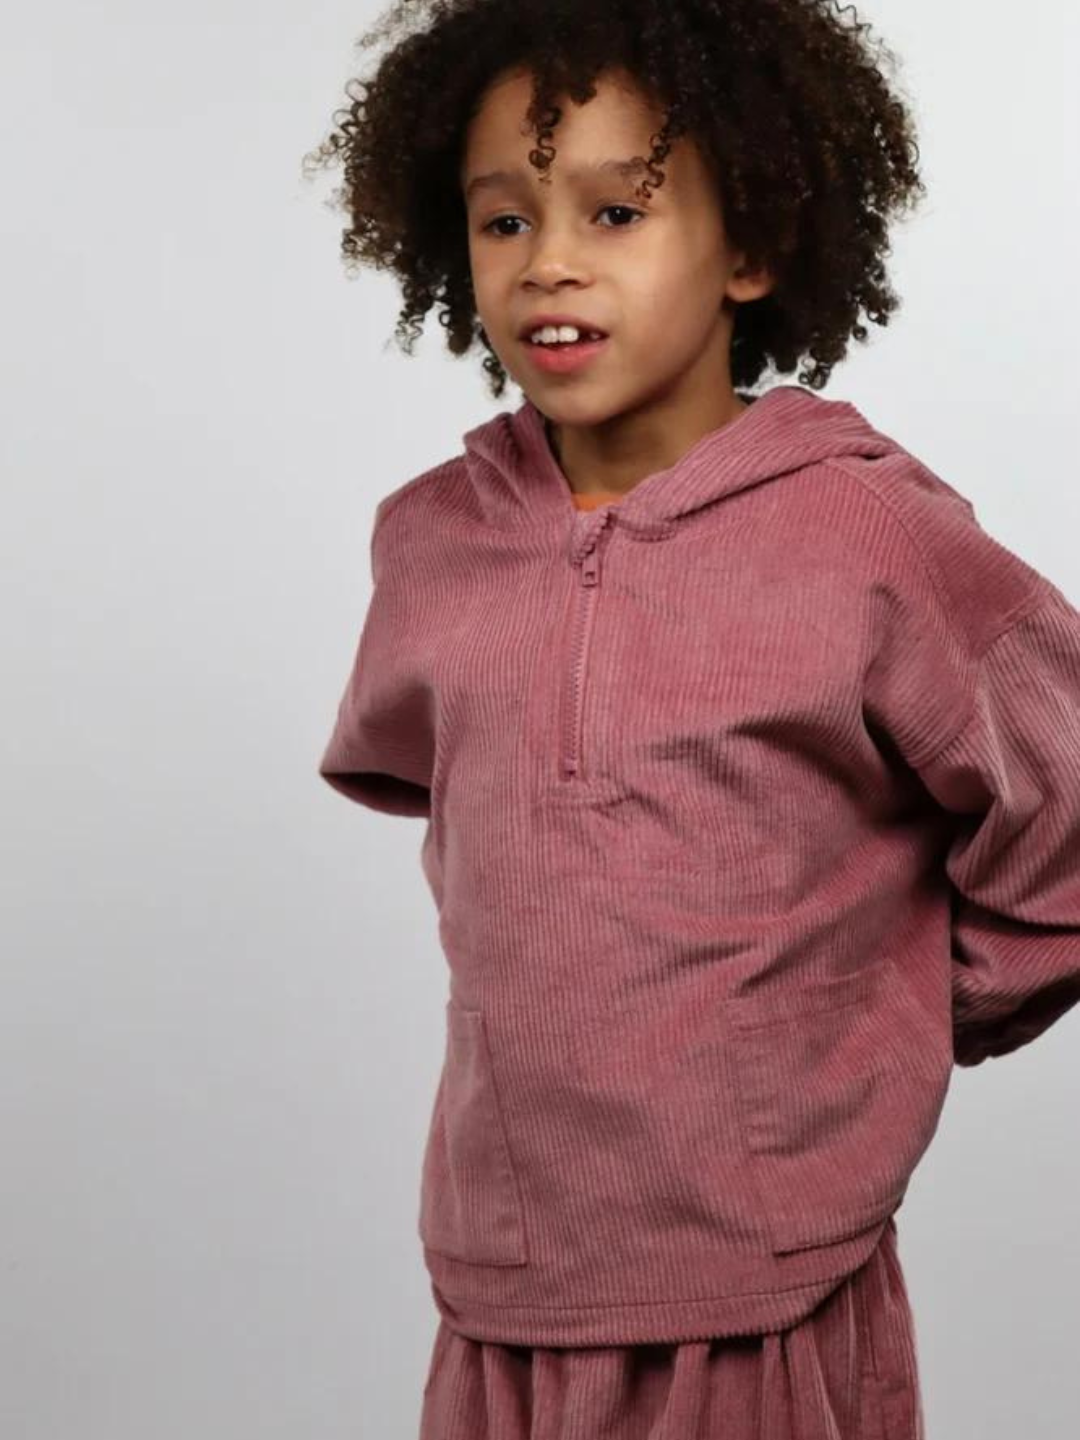 A child wearing a kids' hooded smock top in dusty pink